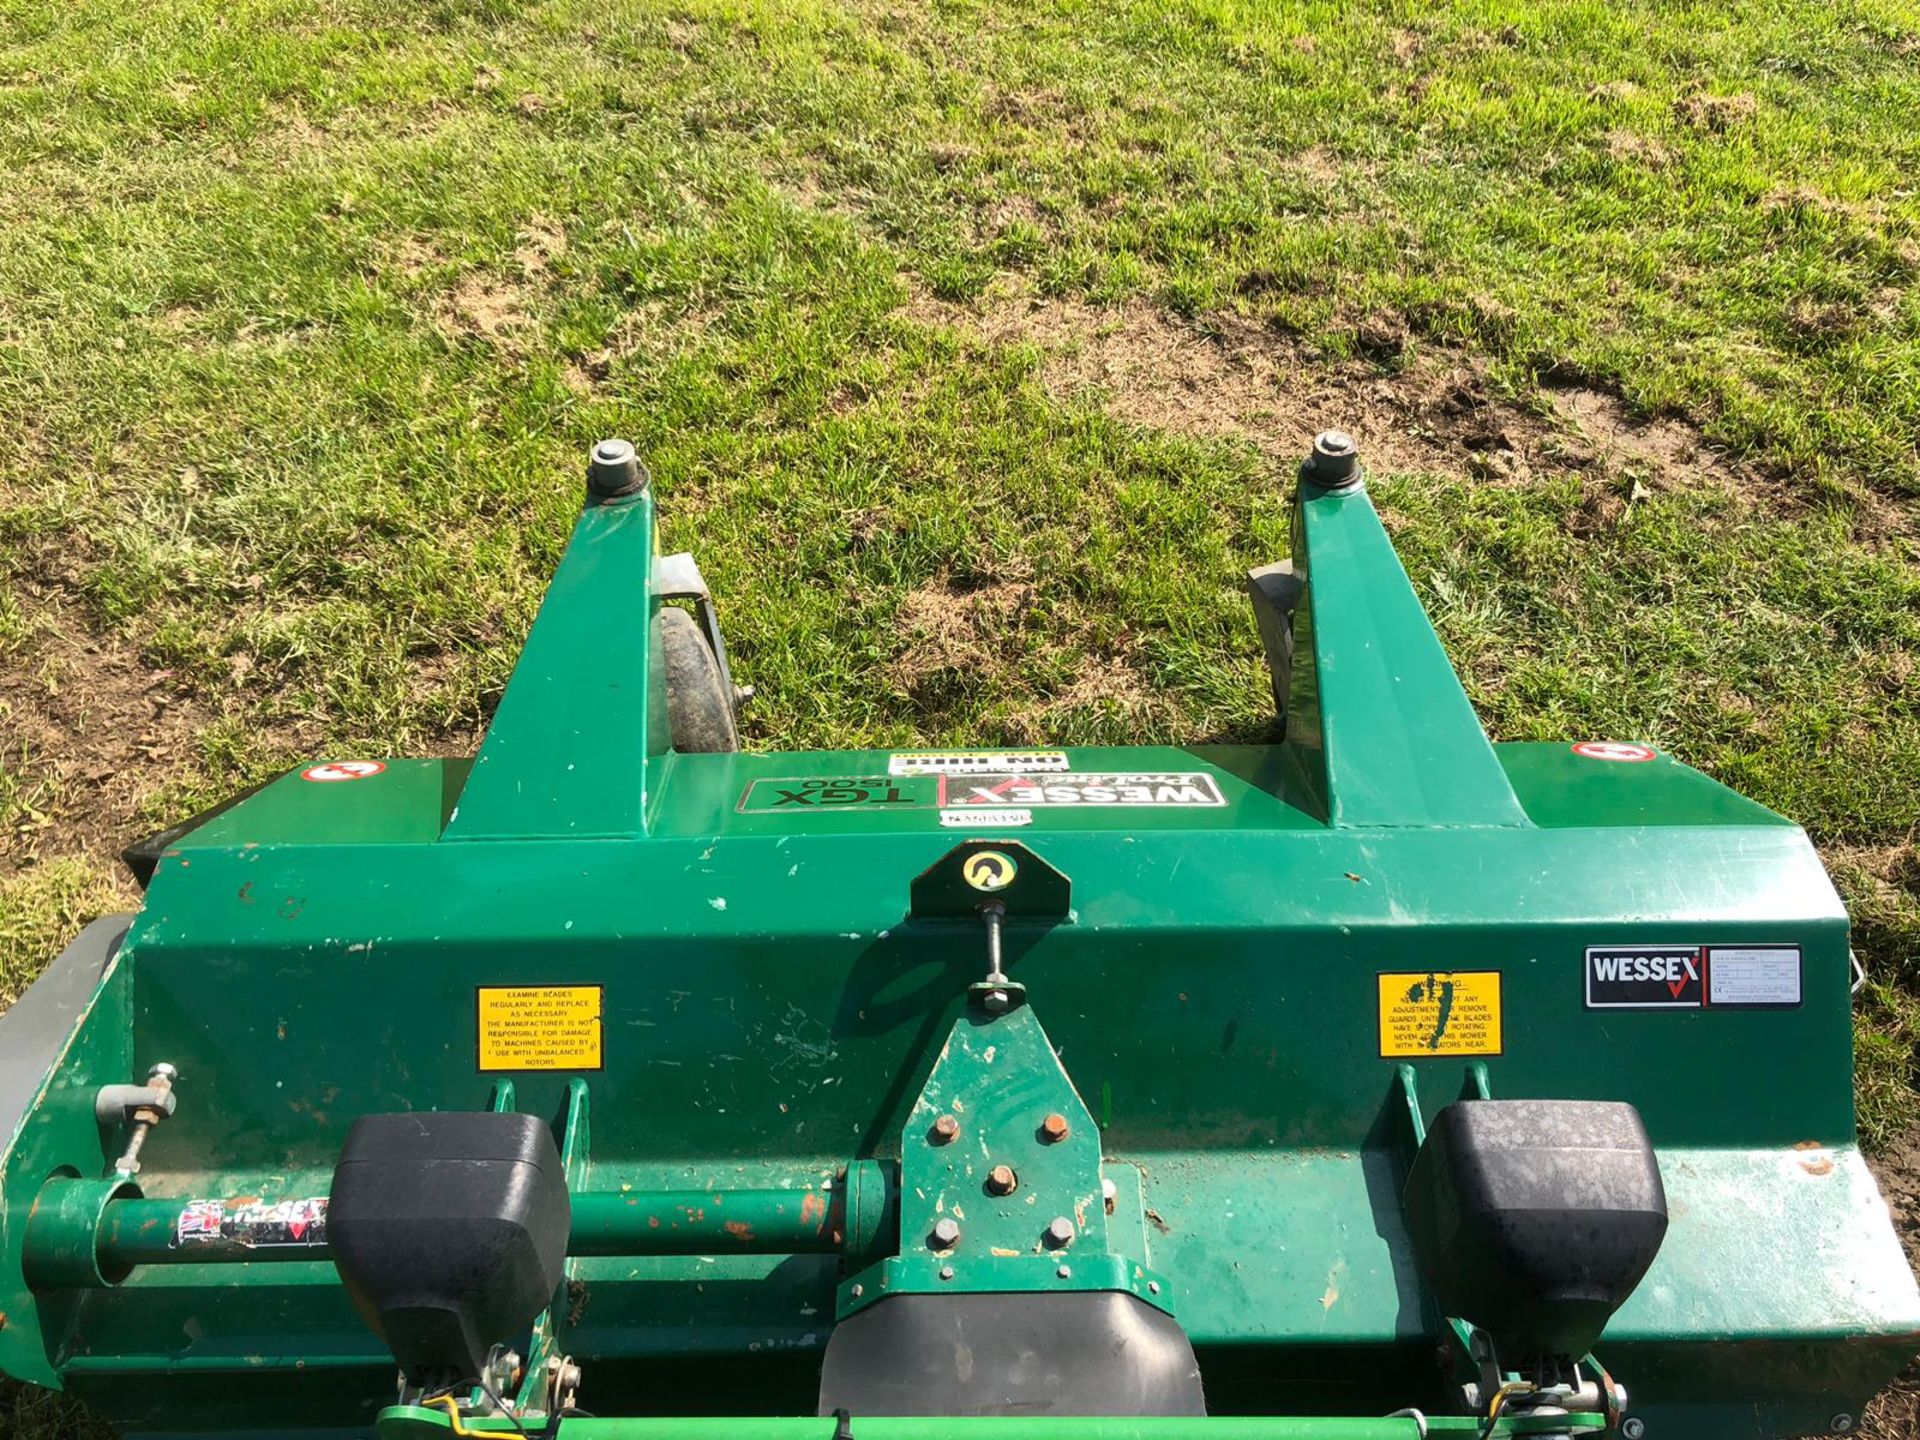 JOHN DEERE 1445 RIDE ON LAWN MOWER WITH FLAIL MOWER, YEAR 2008, RUNS, WORKS AND CUTS *PLUS VAT* - Image 7 of 7